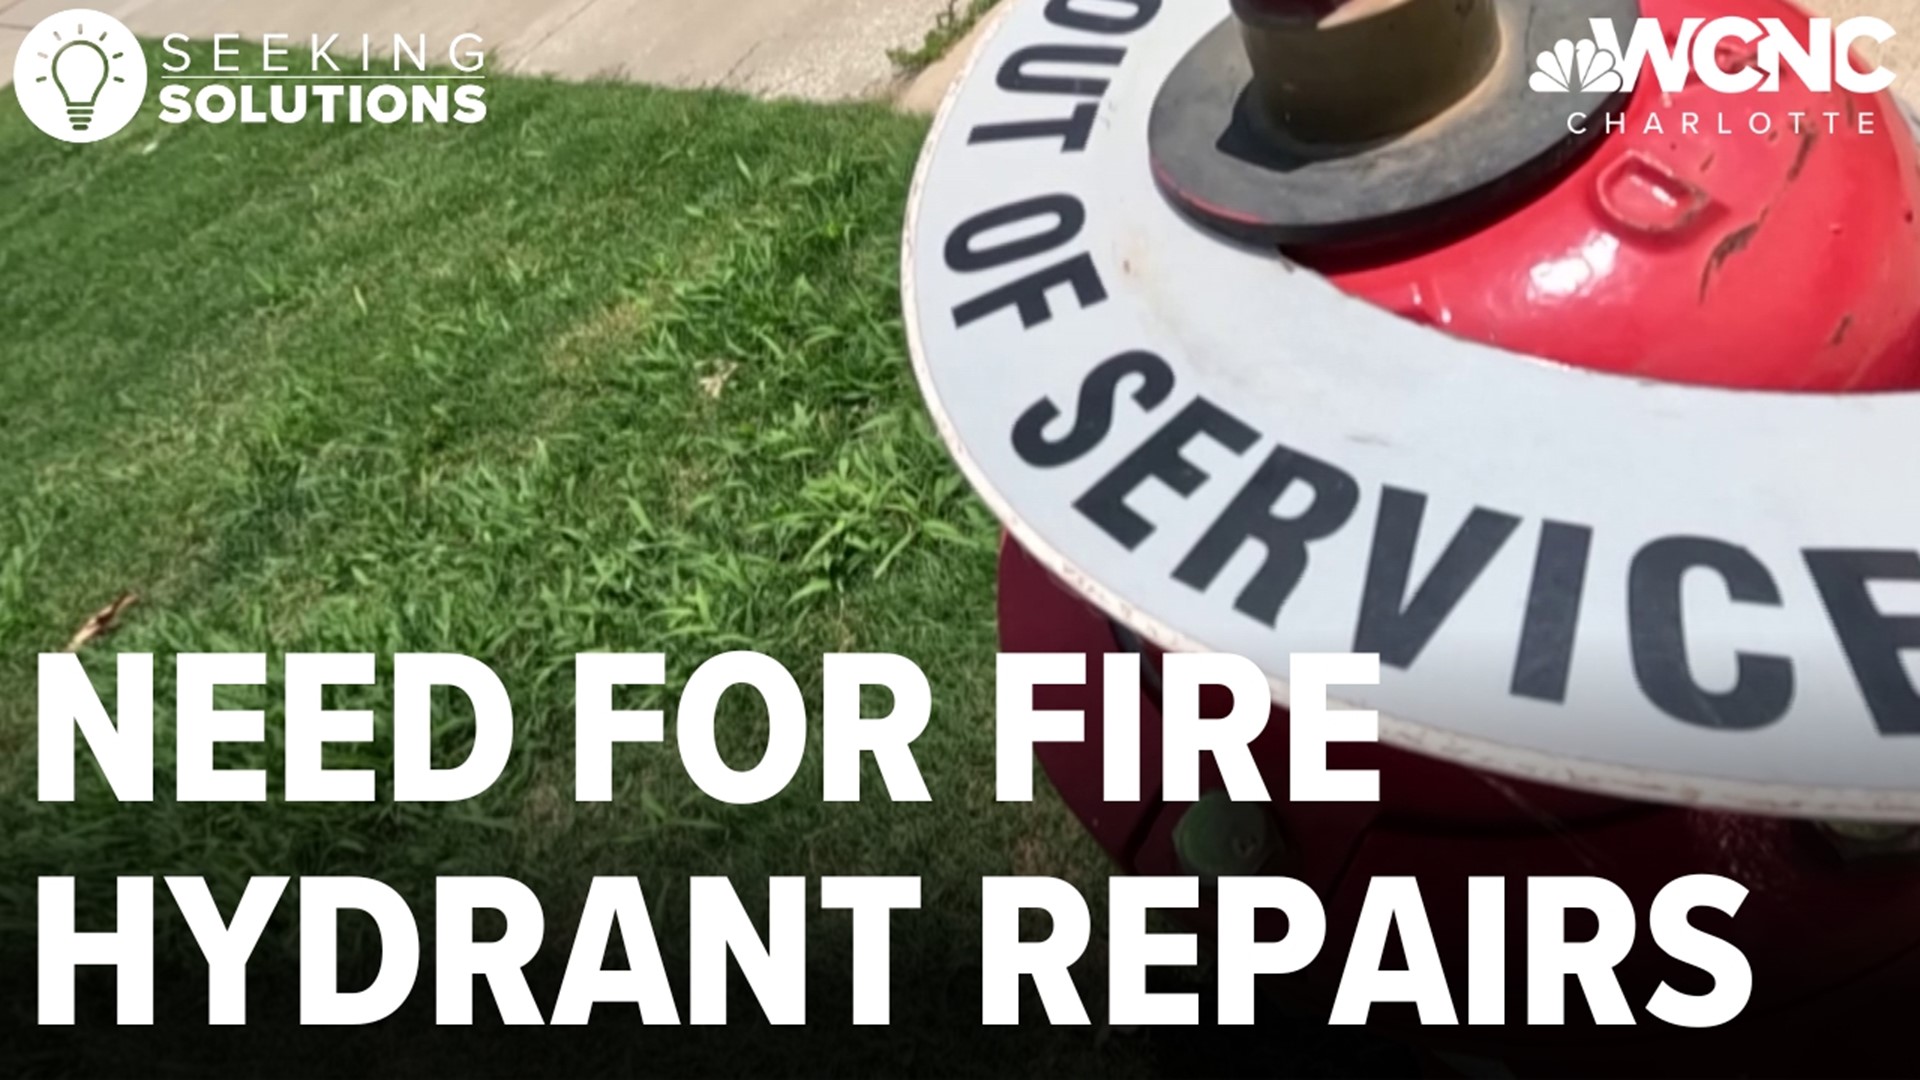 The list is growing, and the fire department says they don't have enough employees to get them all fixed.